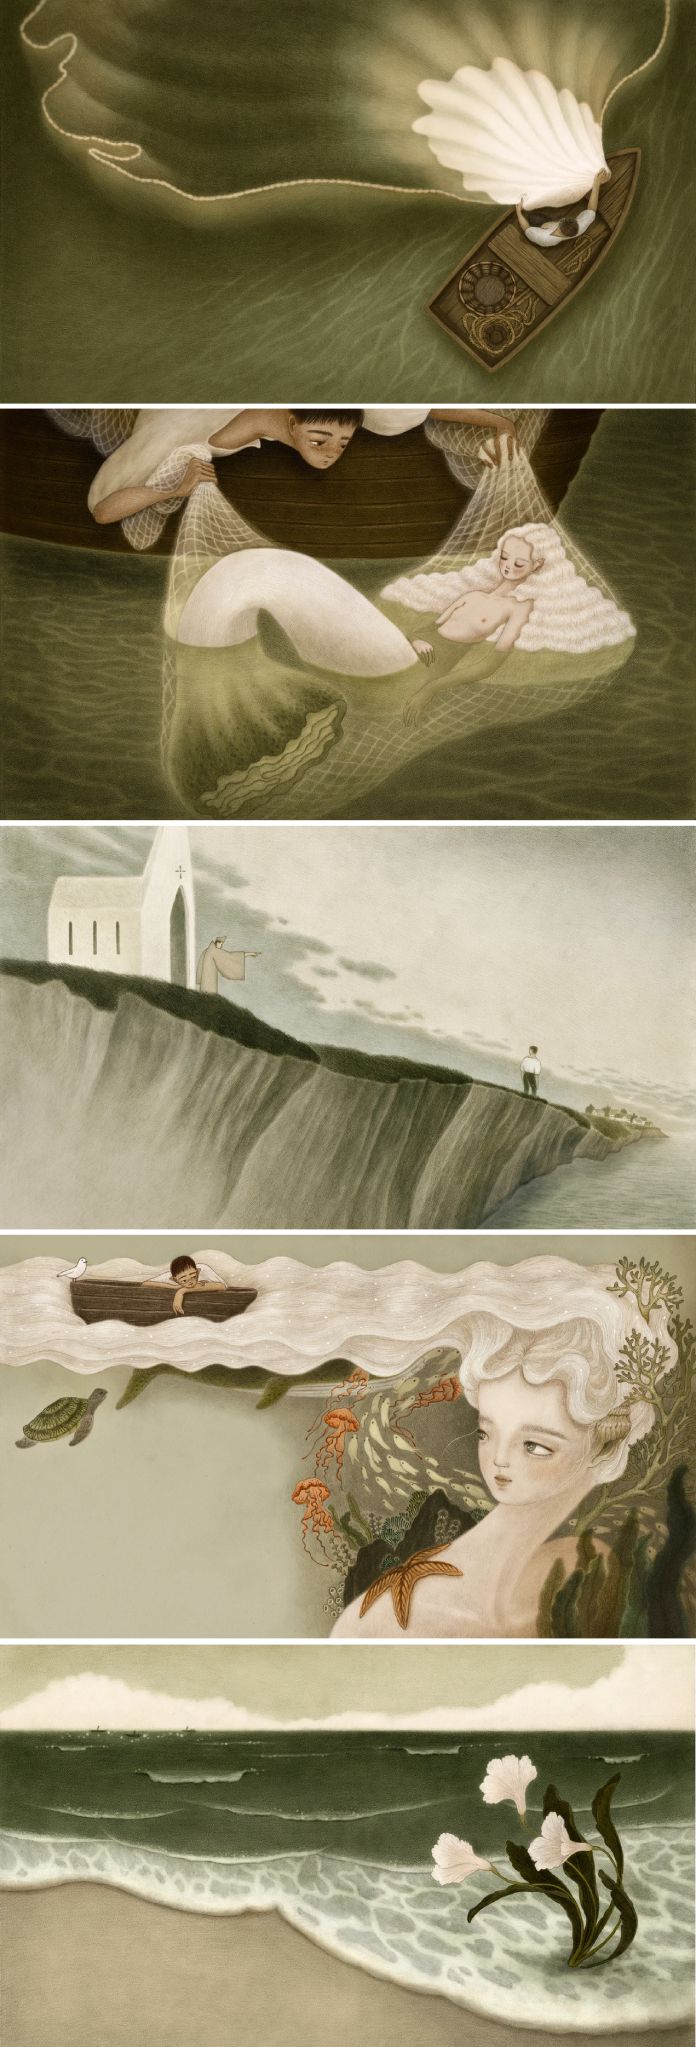 The Fisherman and his Soul by Oscar Wilde - picture book illustration by PeiHsin Cho